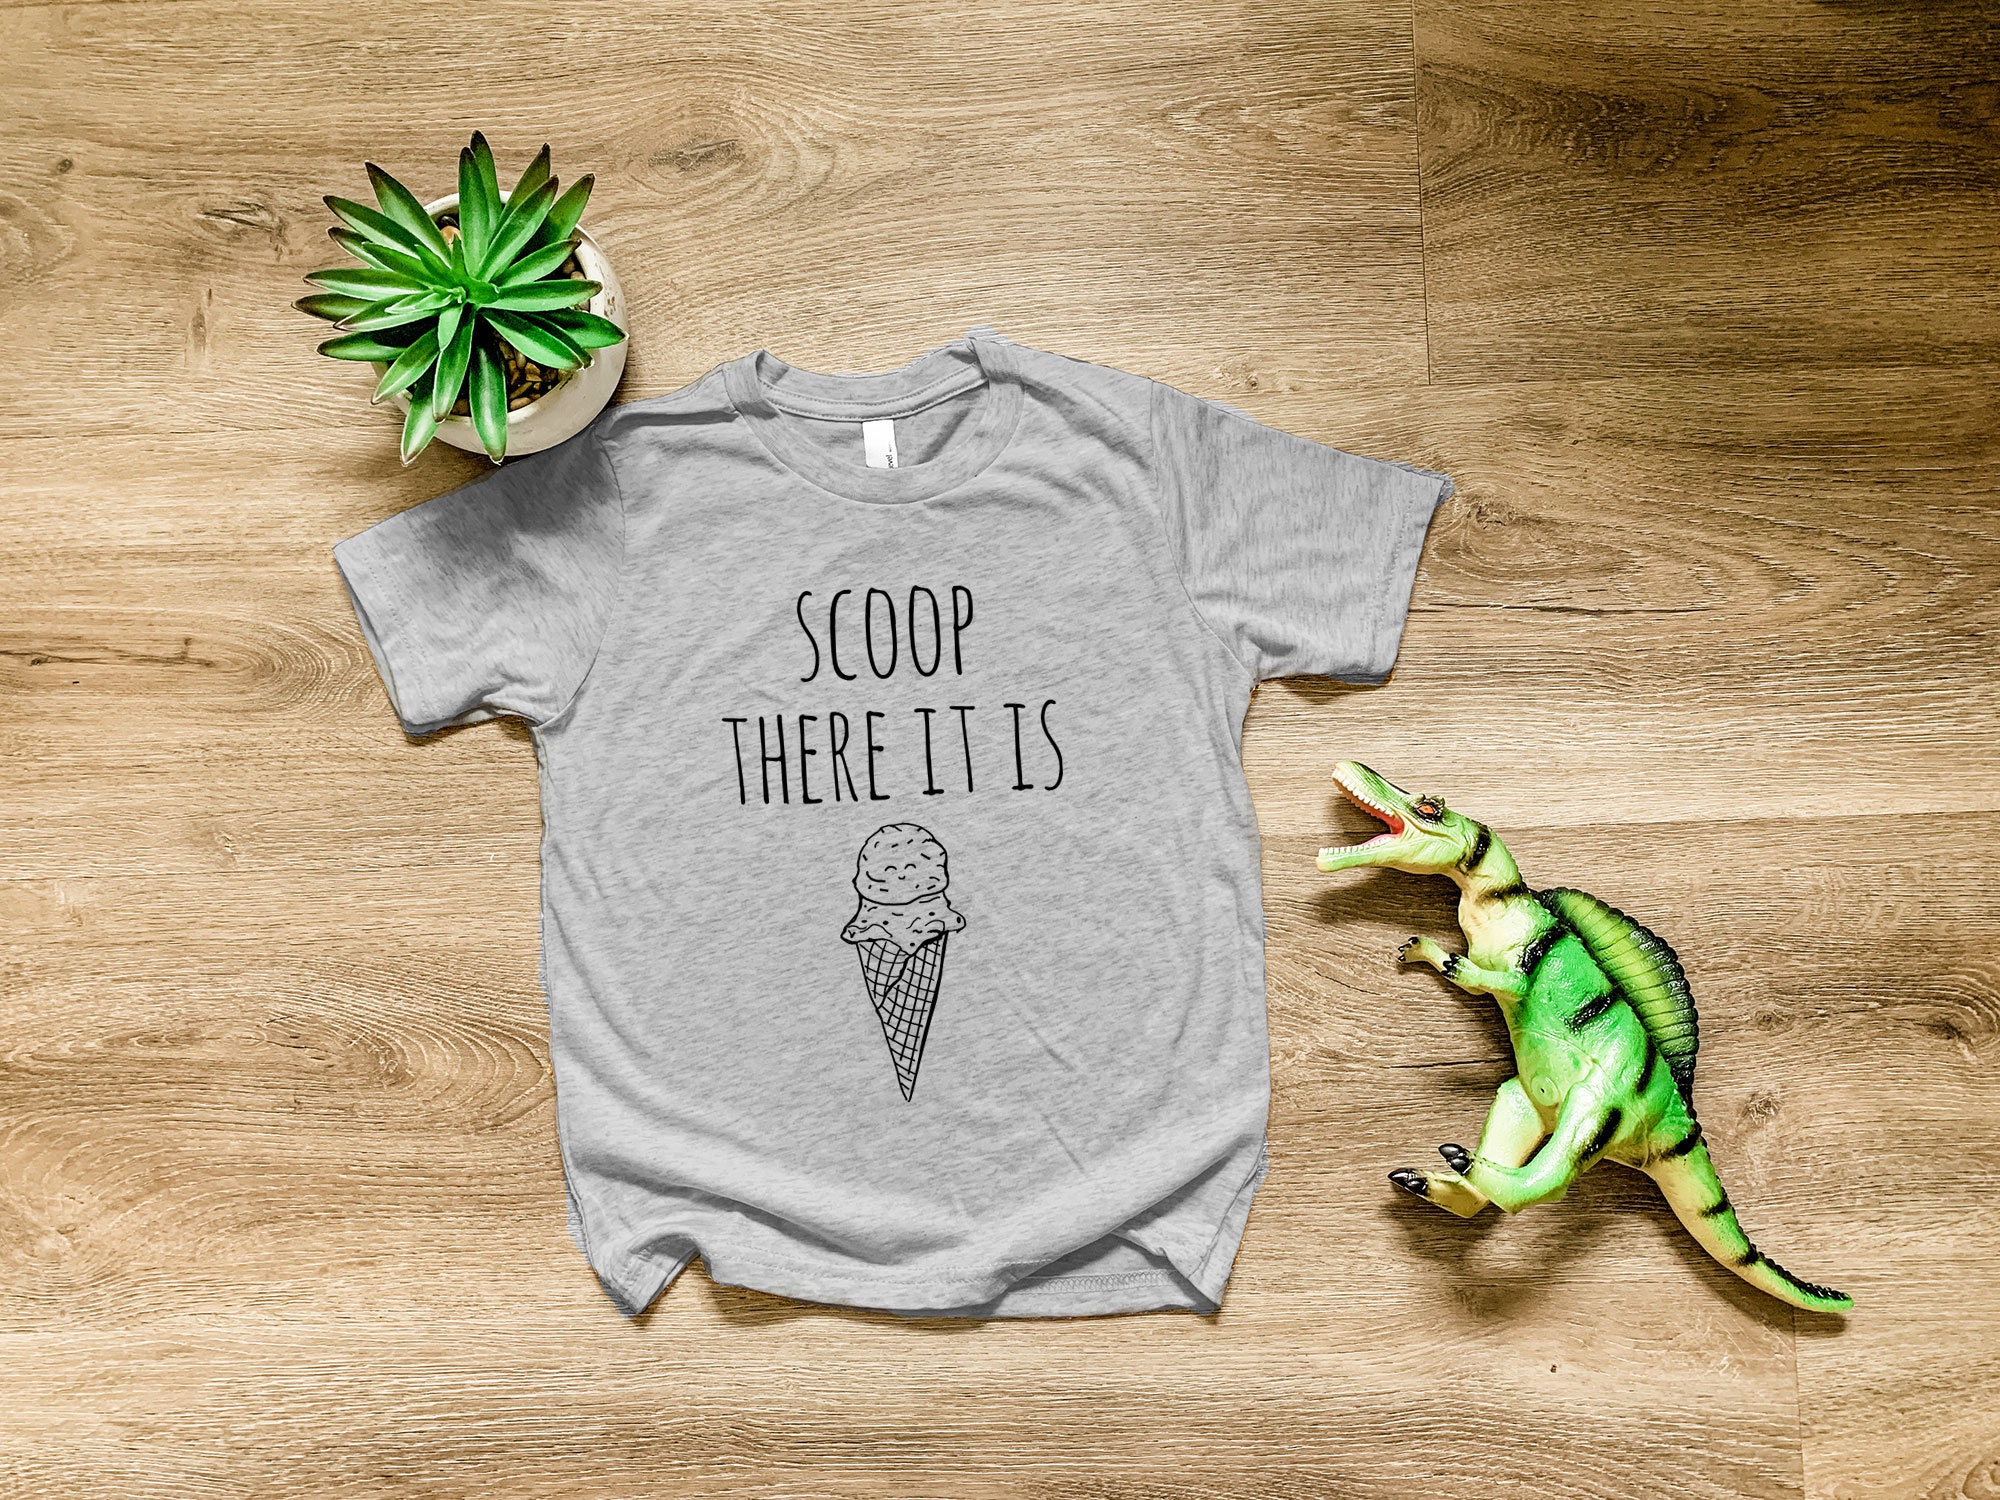 Scoop | There It Is, Kids Tri-Blend T-Shirt, Boy's Tee, Comfortable Funny Gift, Shirts With Sayings, Blue Or Gray